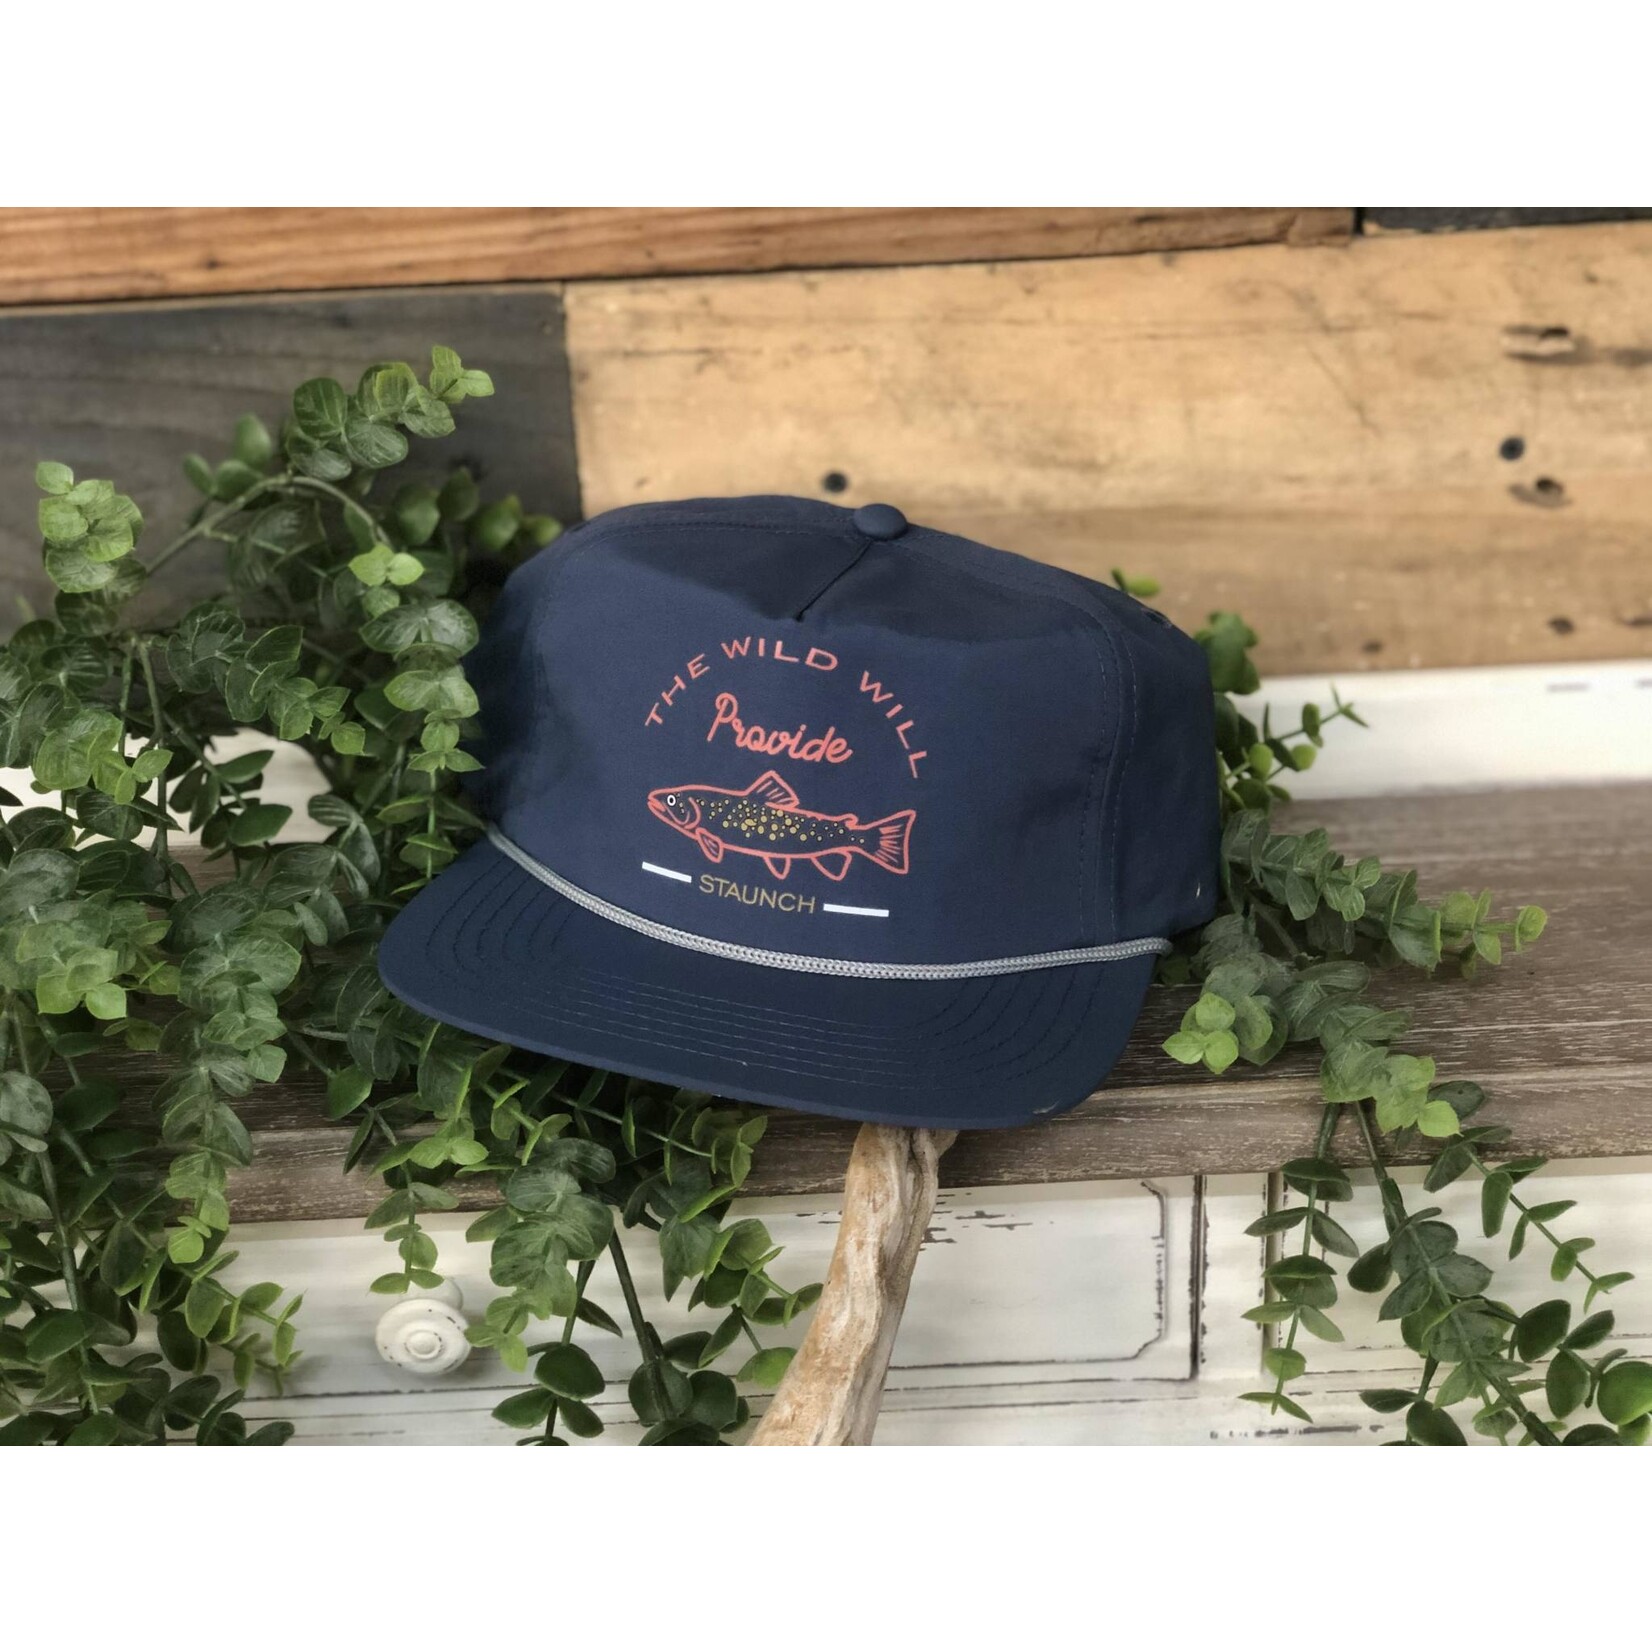 Staunch Staunch The Wild will Provide Rope Snapback Hat